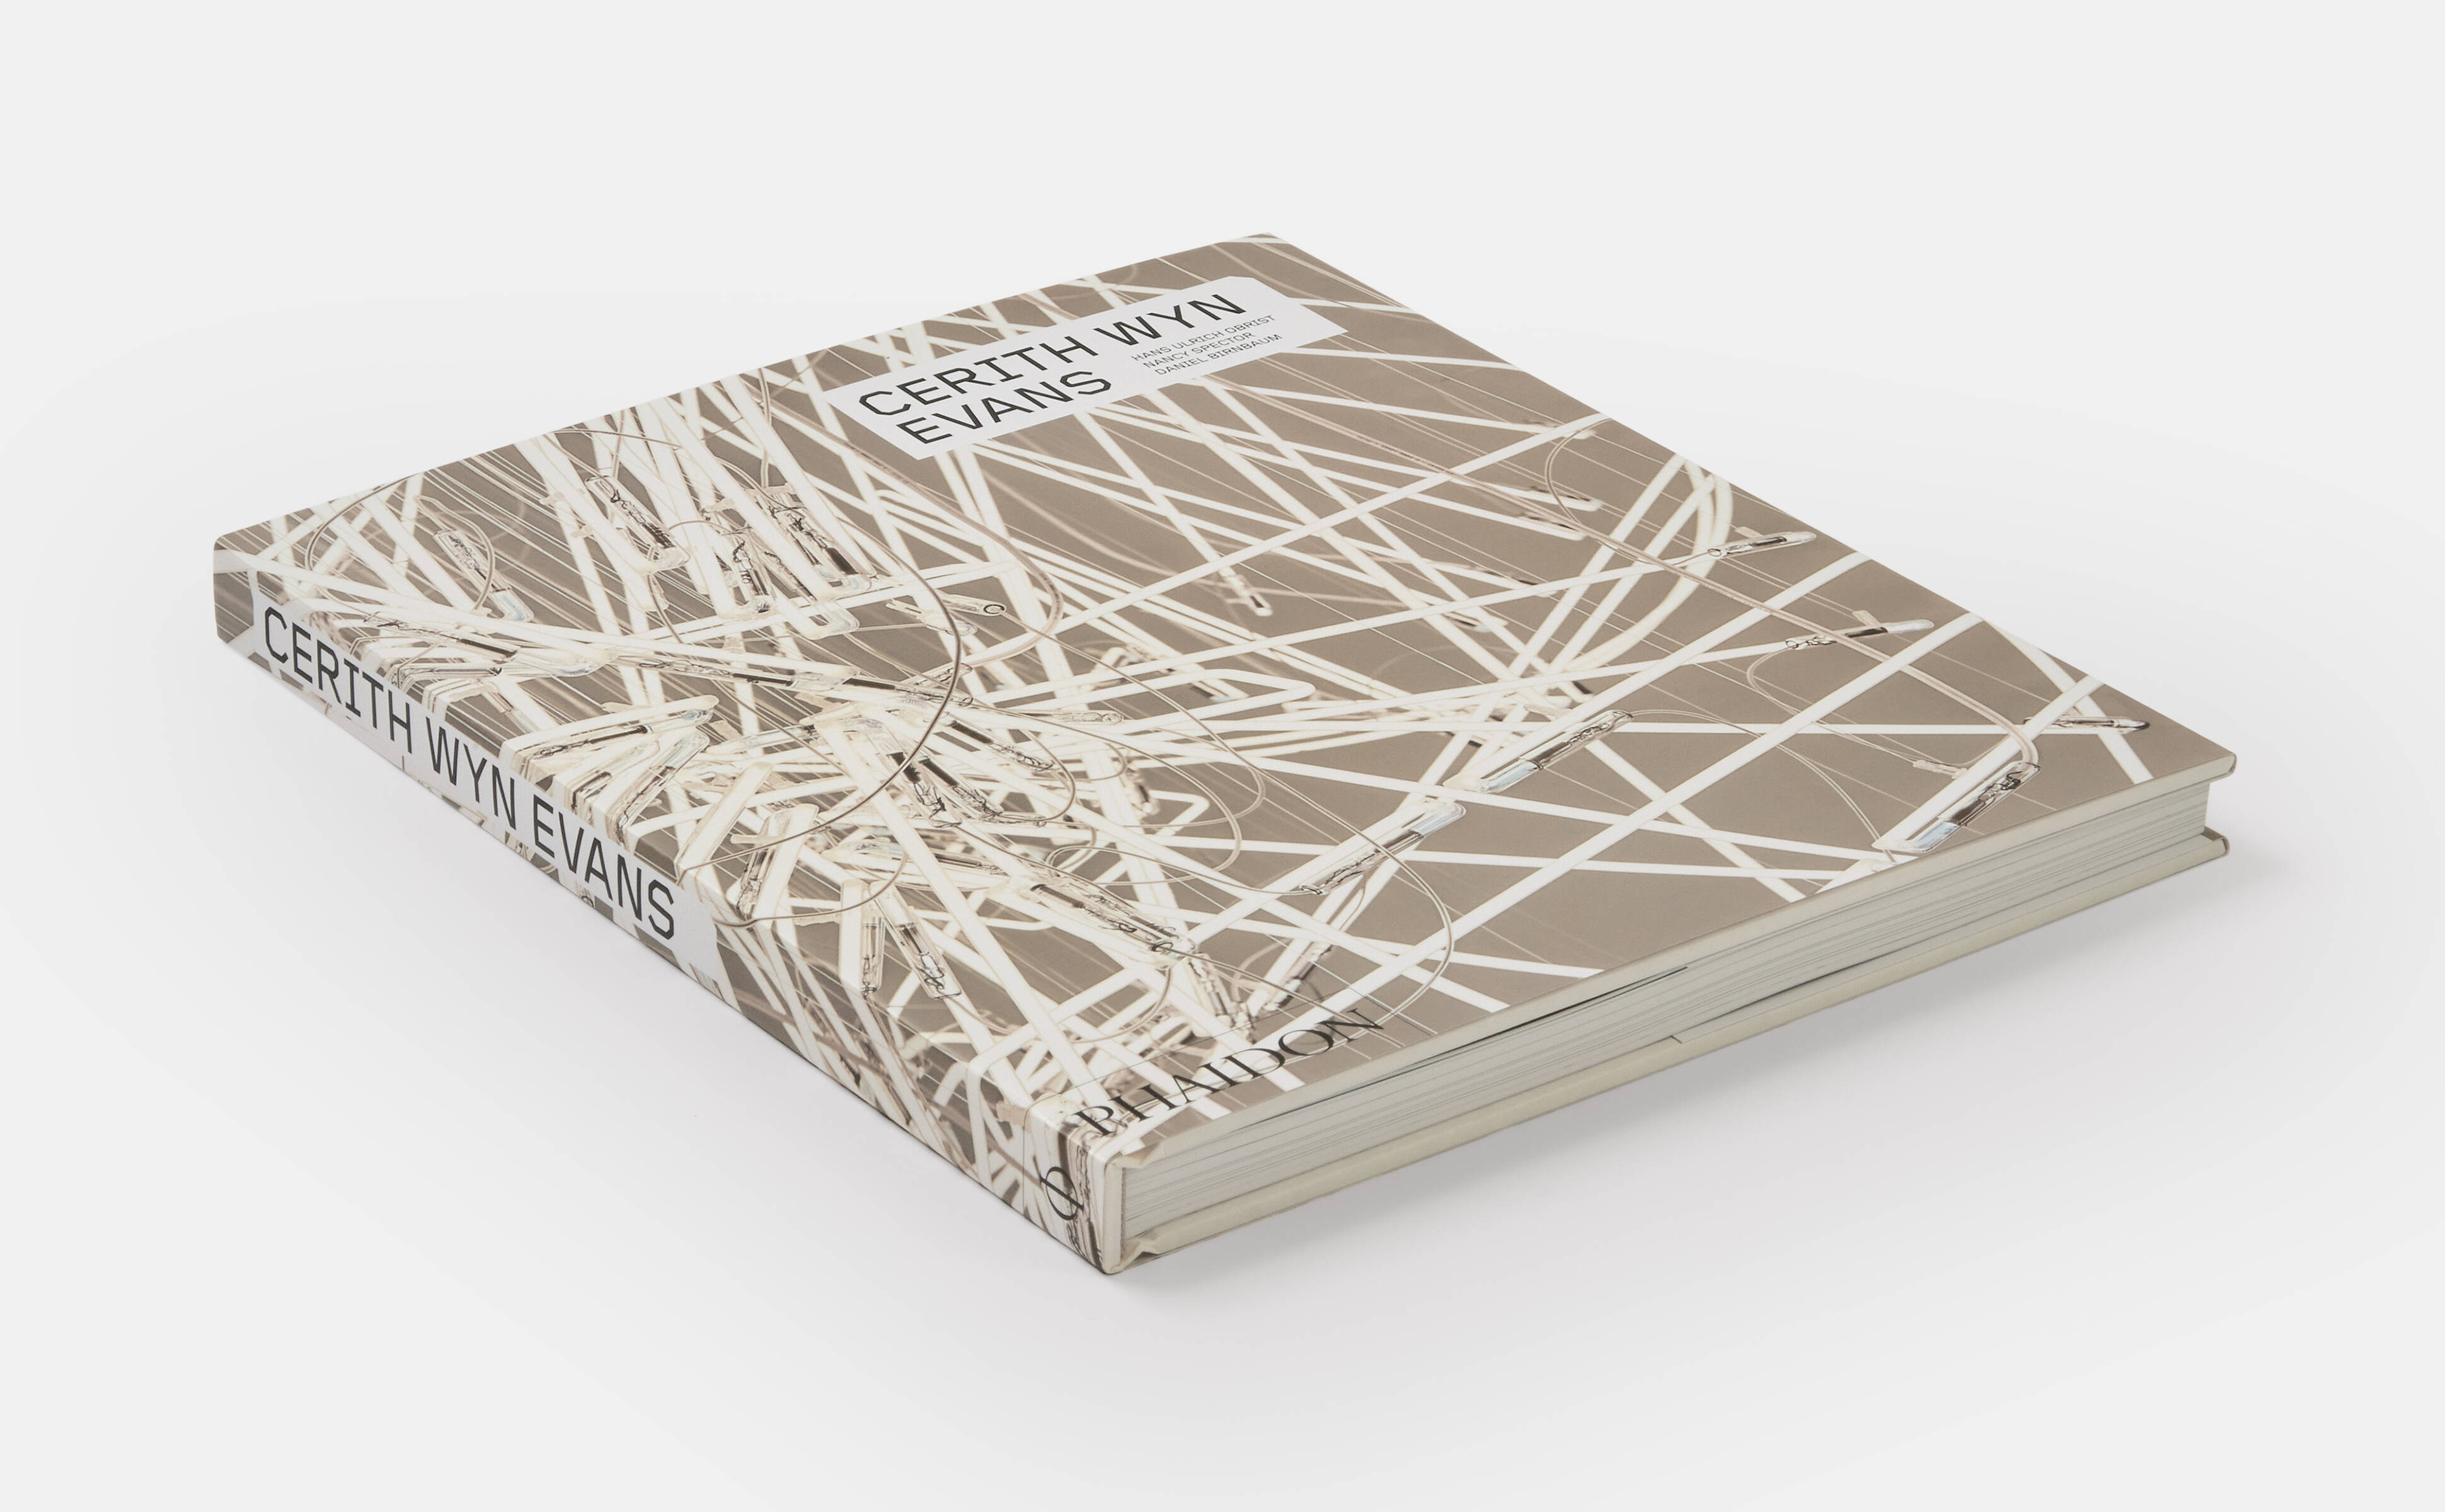 Cerith Wyn Evans releases new Phaidon & Artspace edition